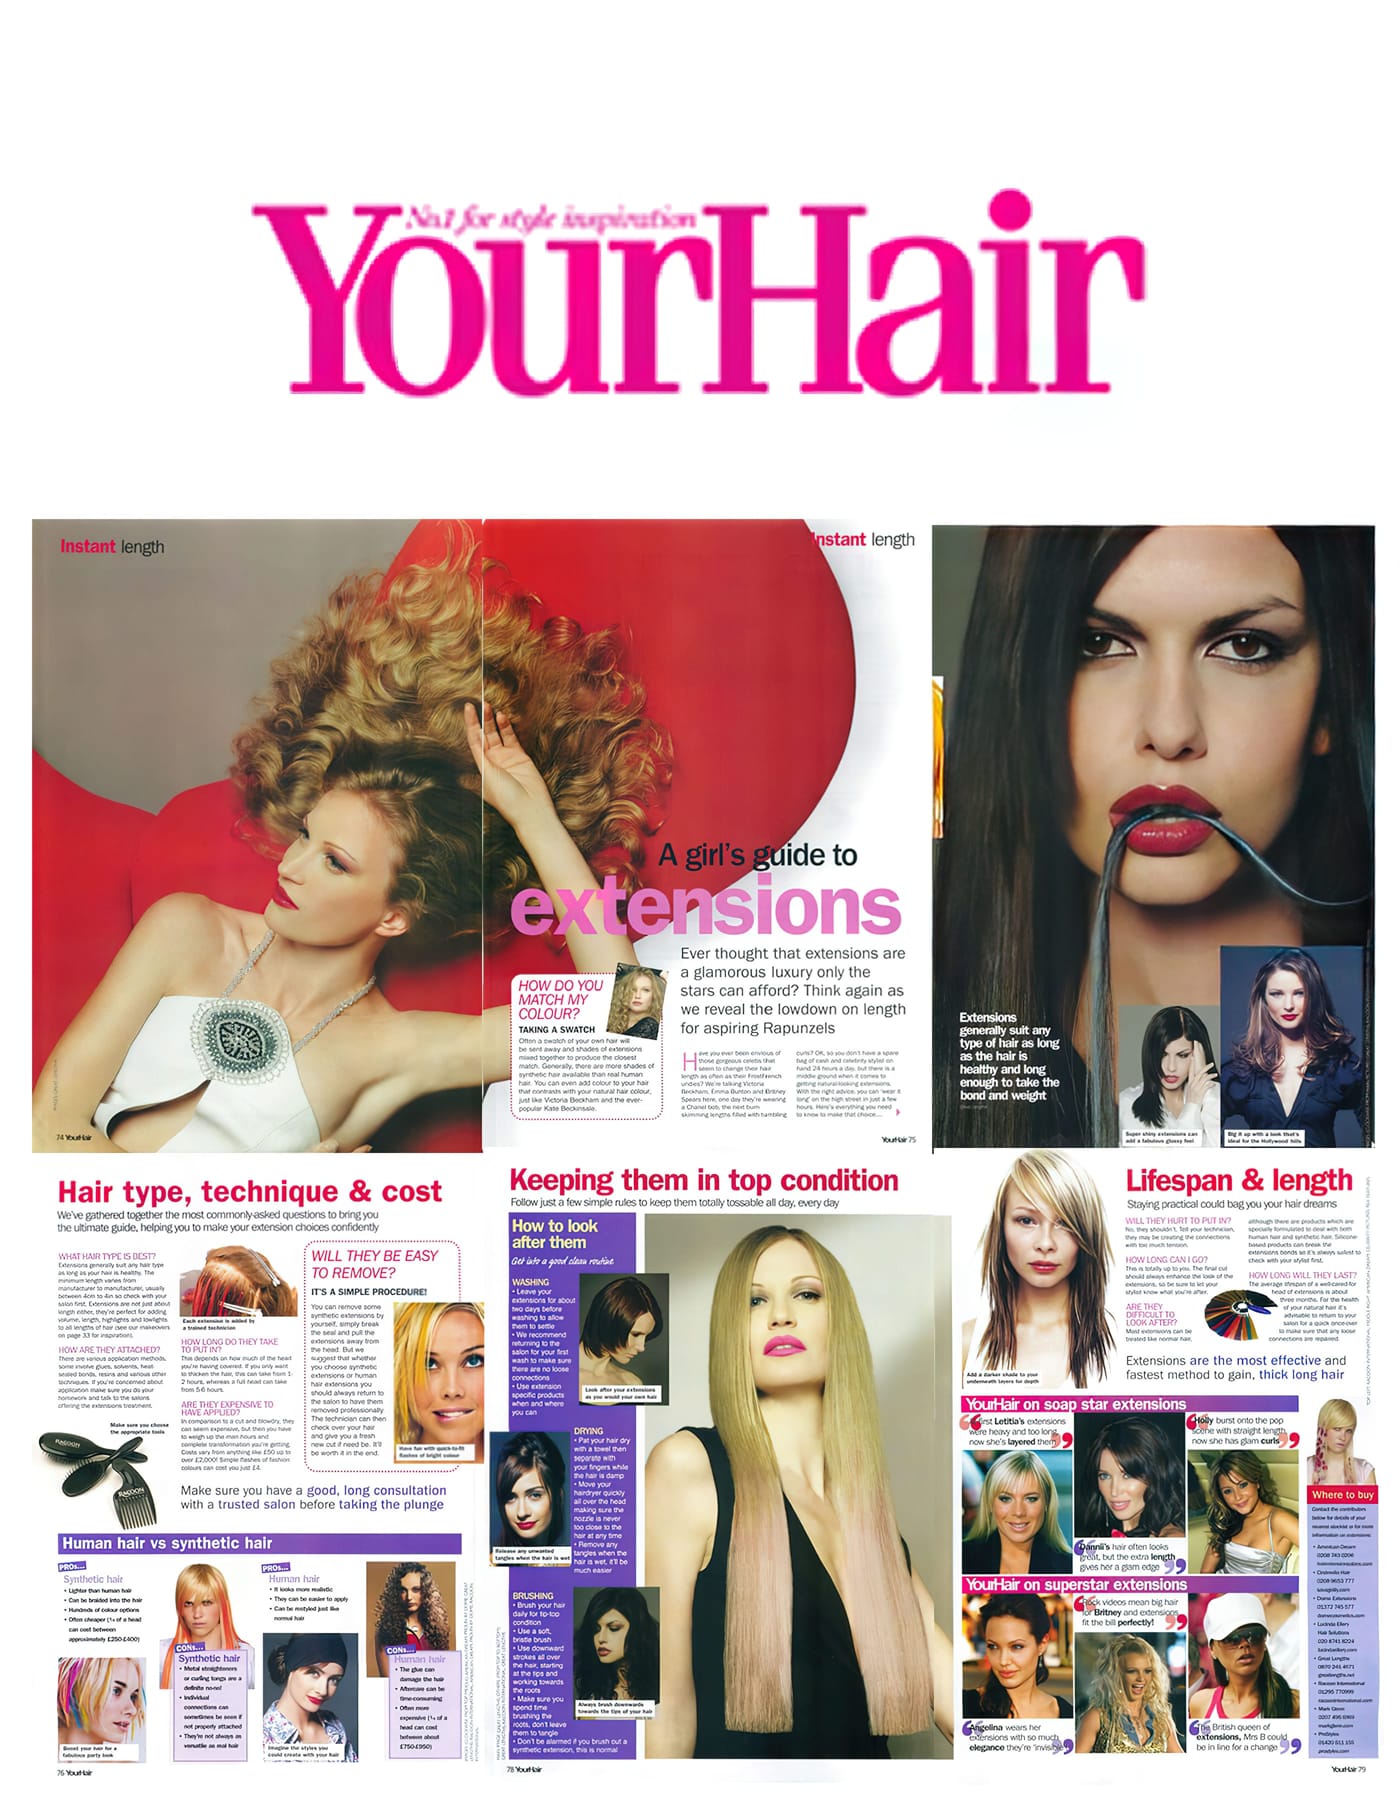 Your Hair recommends Mark Glenn in 'A Girl's Guide to Extensions'